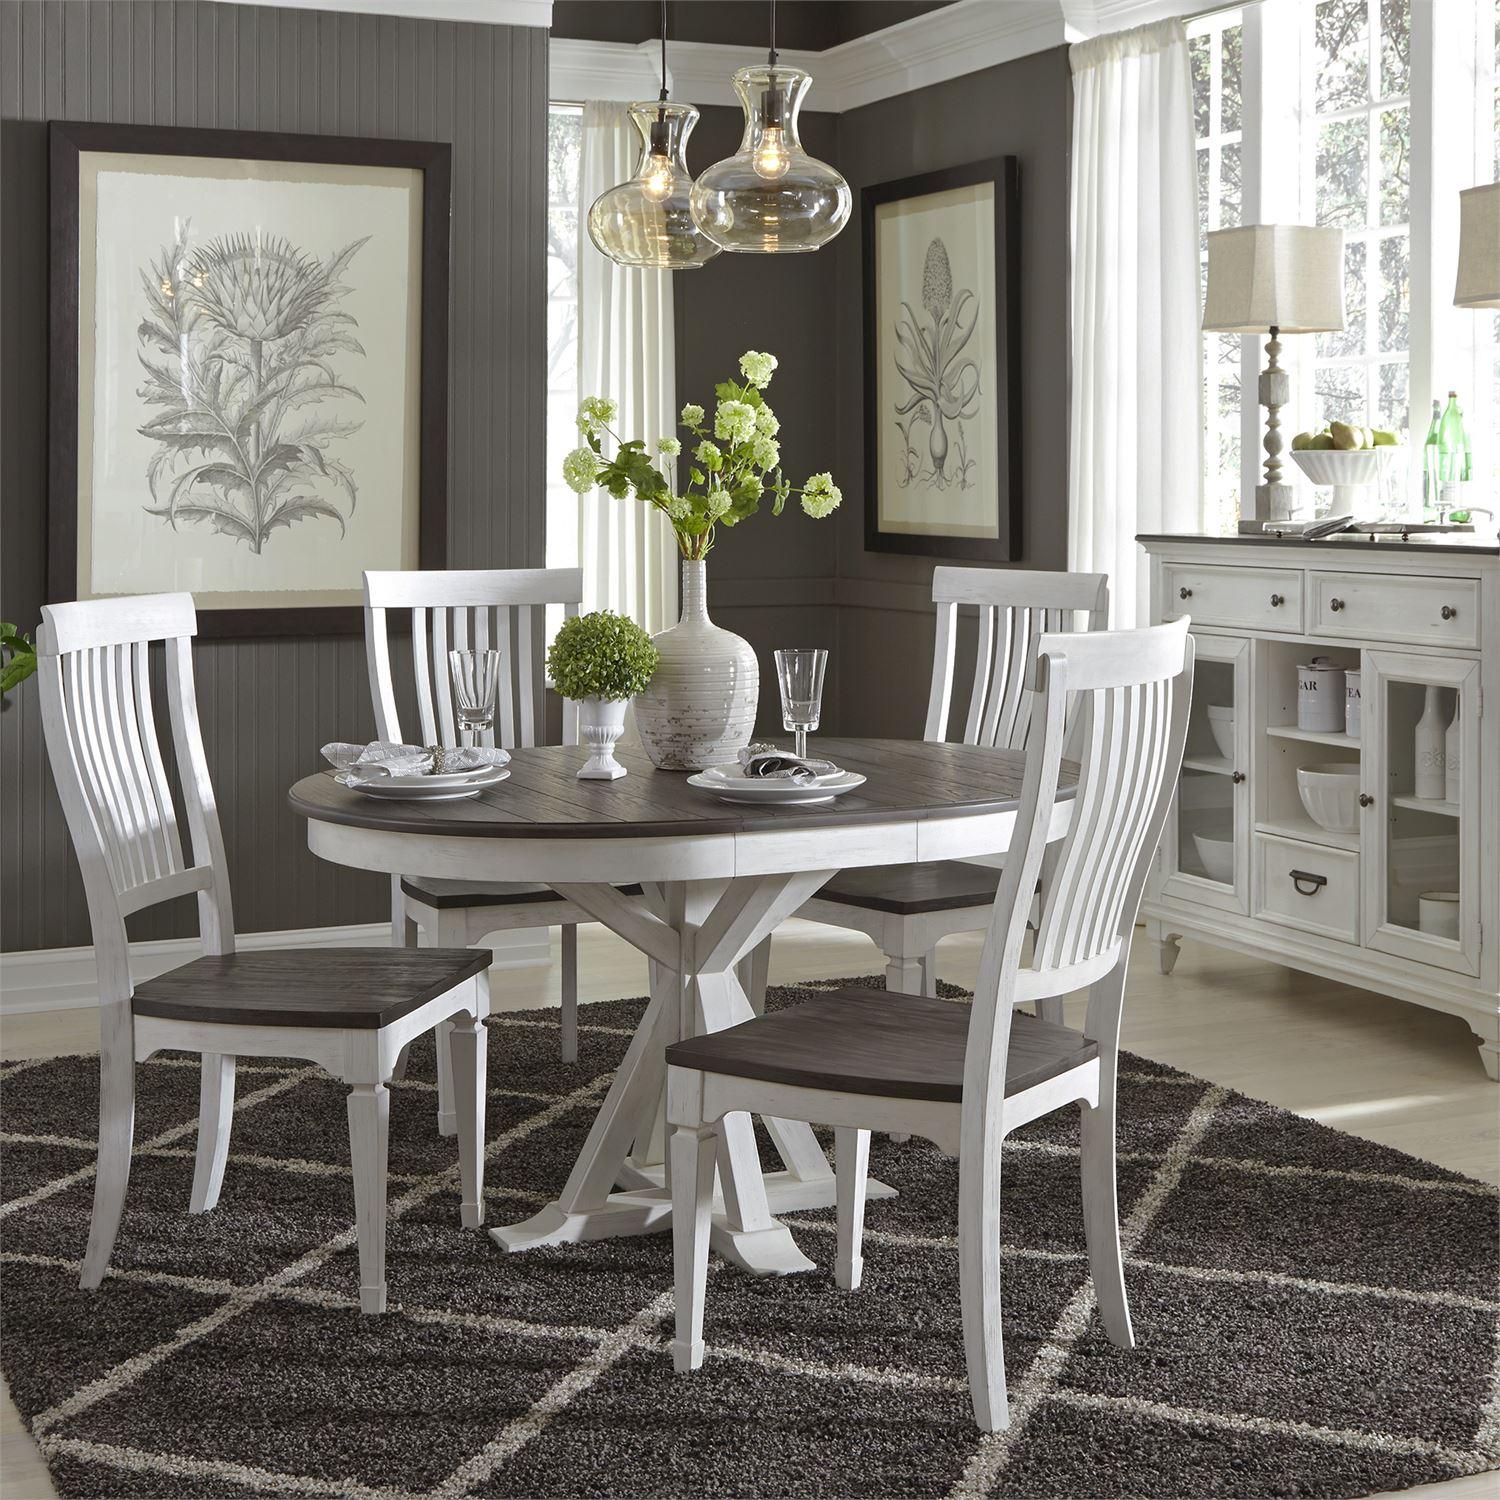 Allyson Park Round Dining Table & 4 Chairs,MISC.